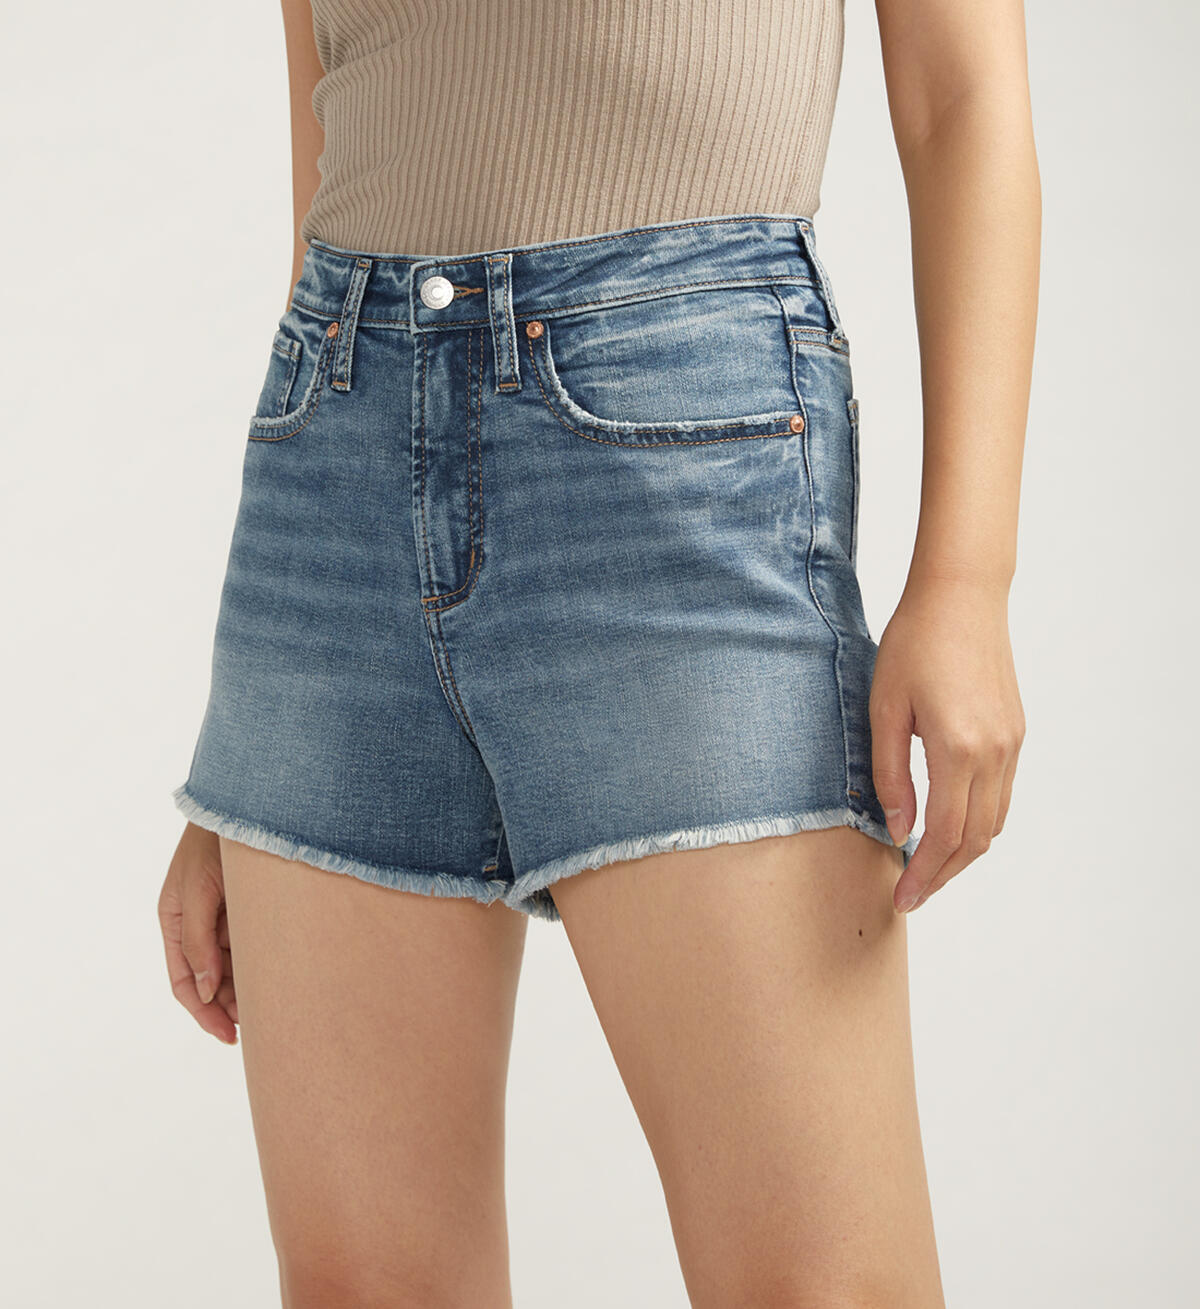 Designed with the perfect amount of everything, boyfriend-fit Beau is as easygoing as it is flattering from waist to hip. These comfortable warm-weather women’s shorts feature a not-too-high high rise that elongates your legs for a more streamlined silhouette.